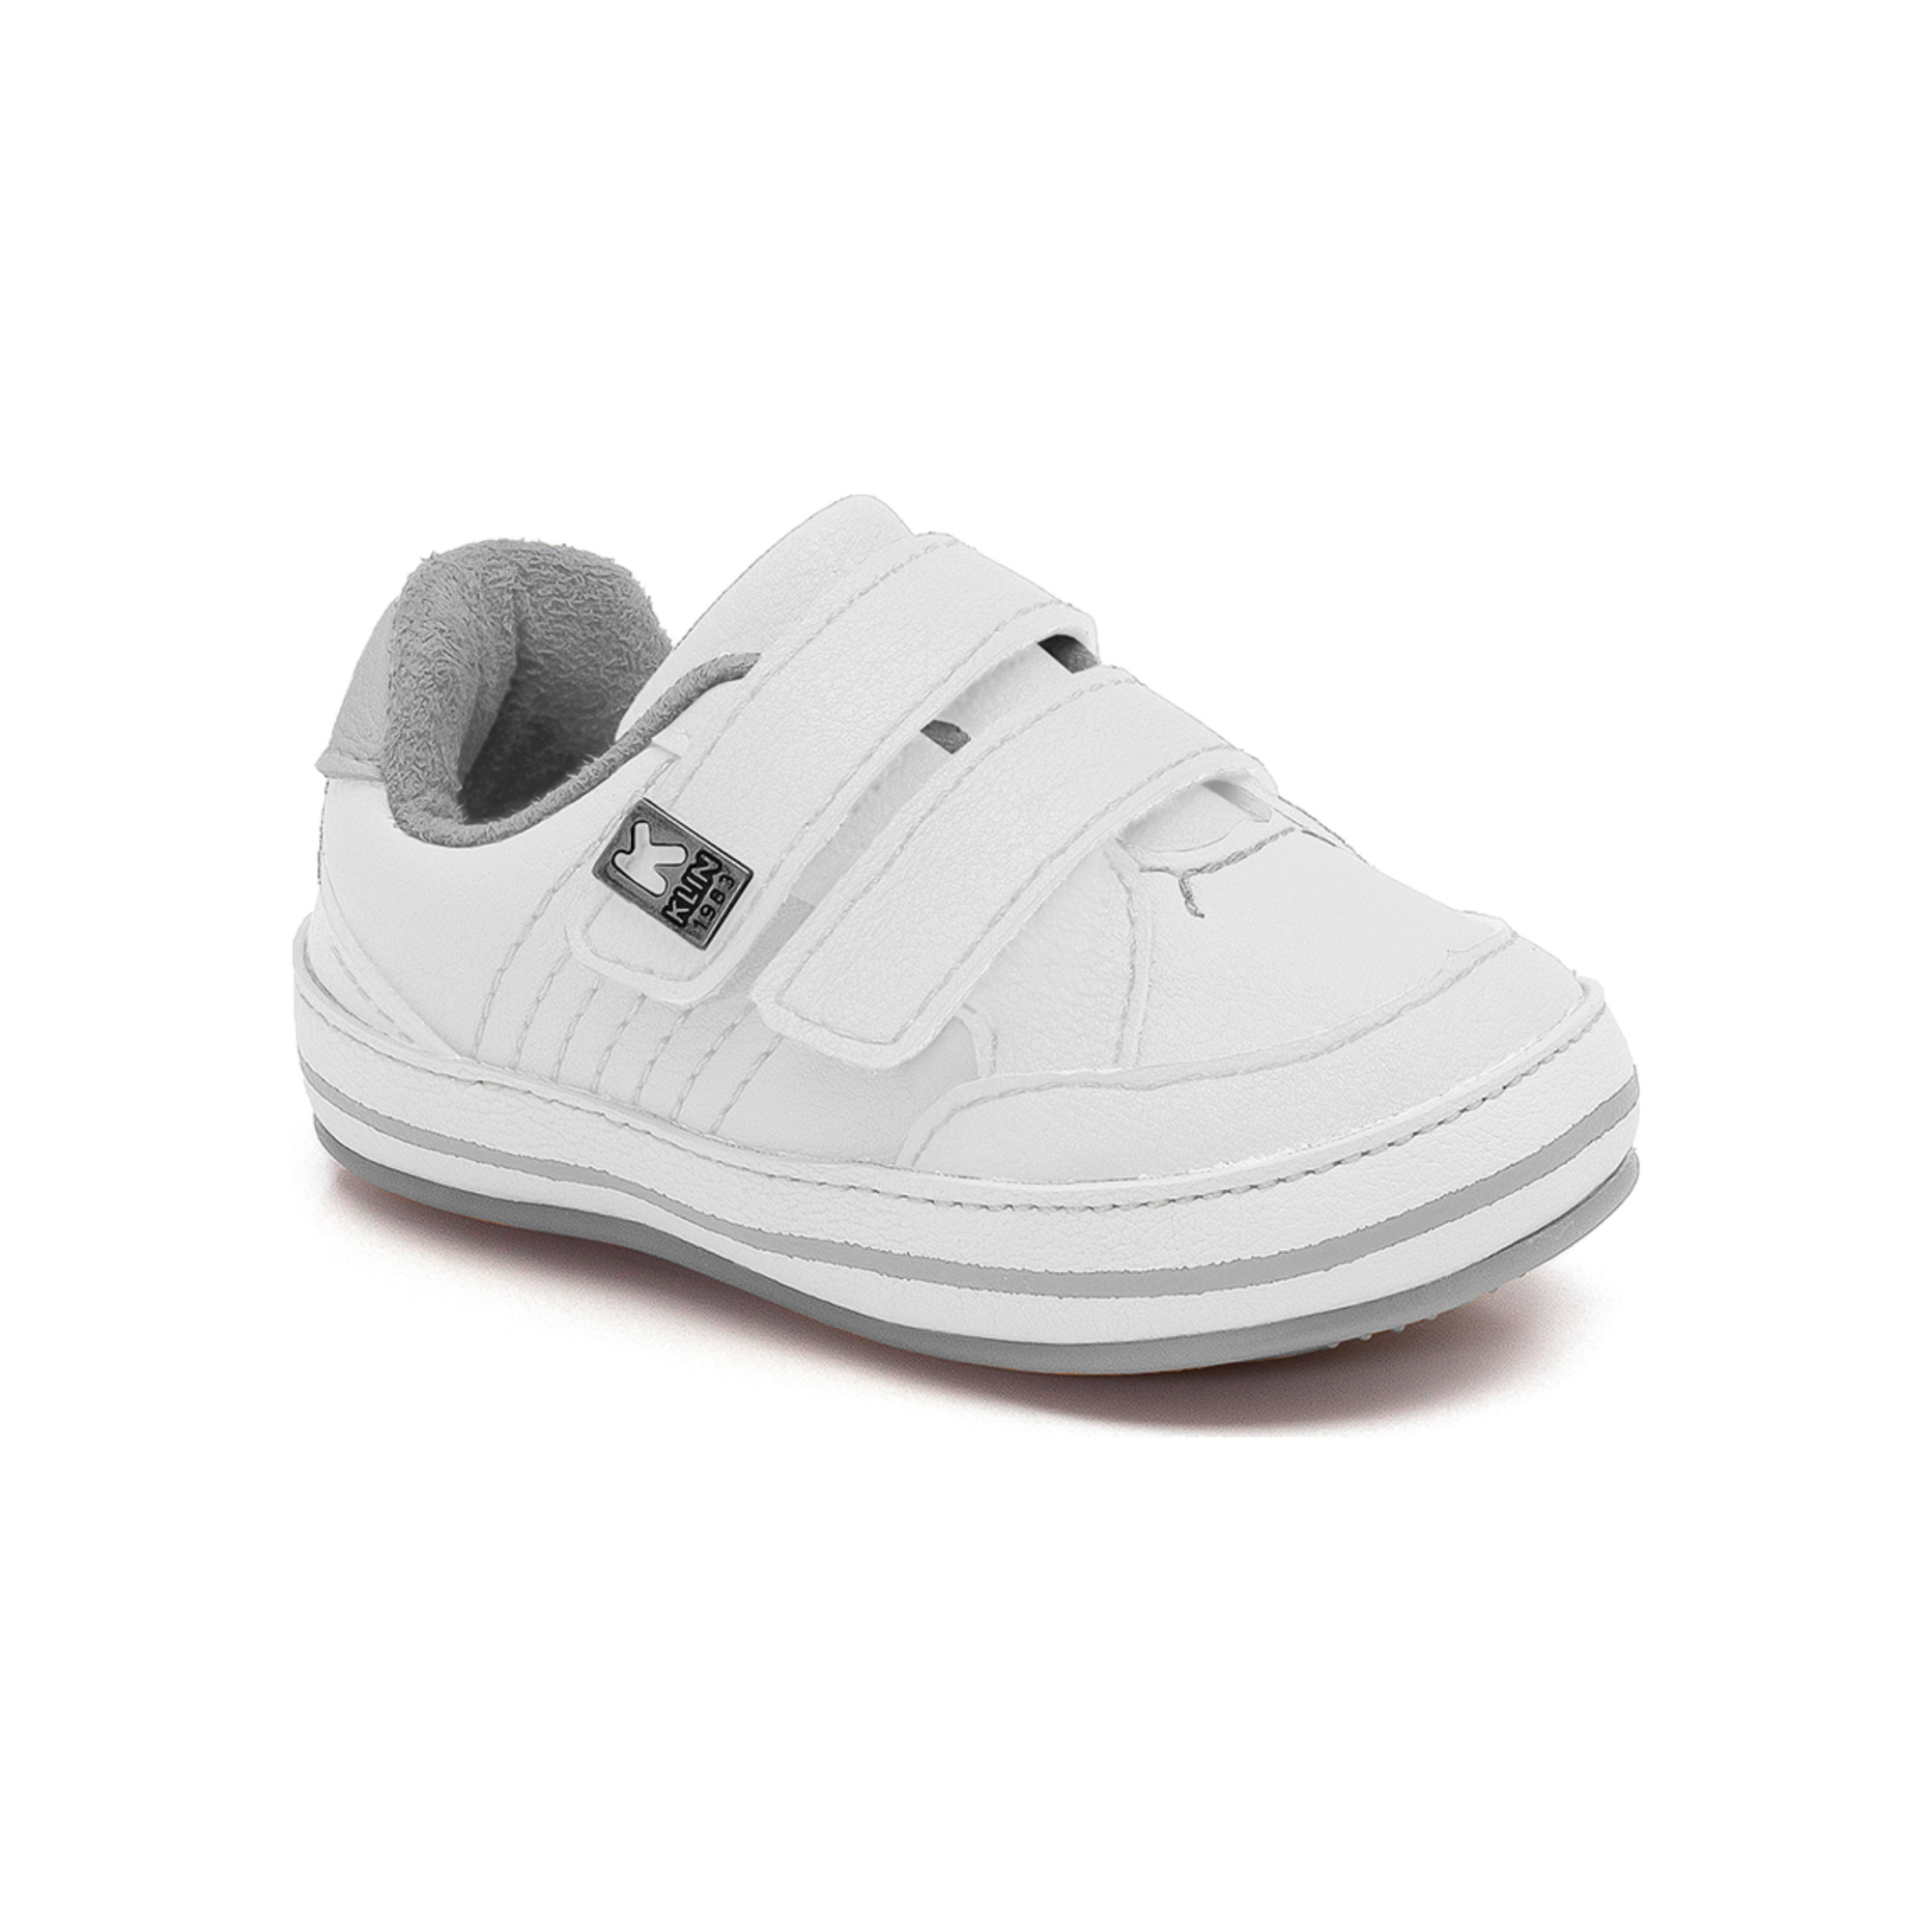 Baby Nathan's Shoes